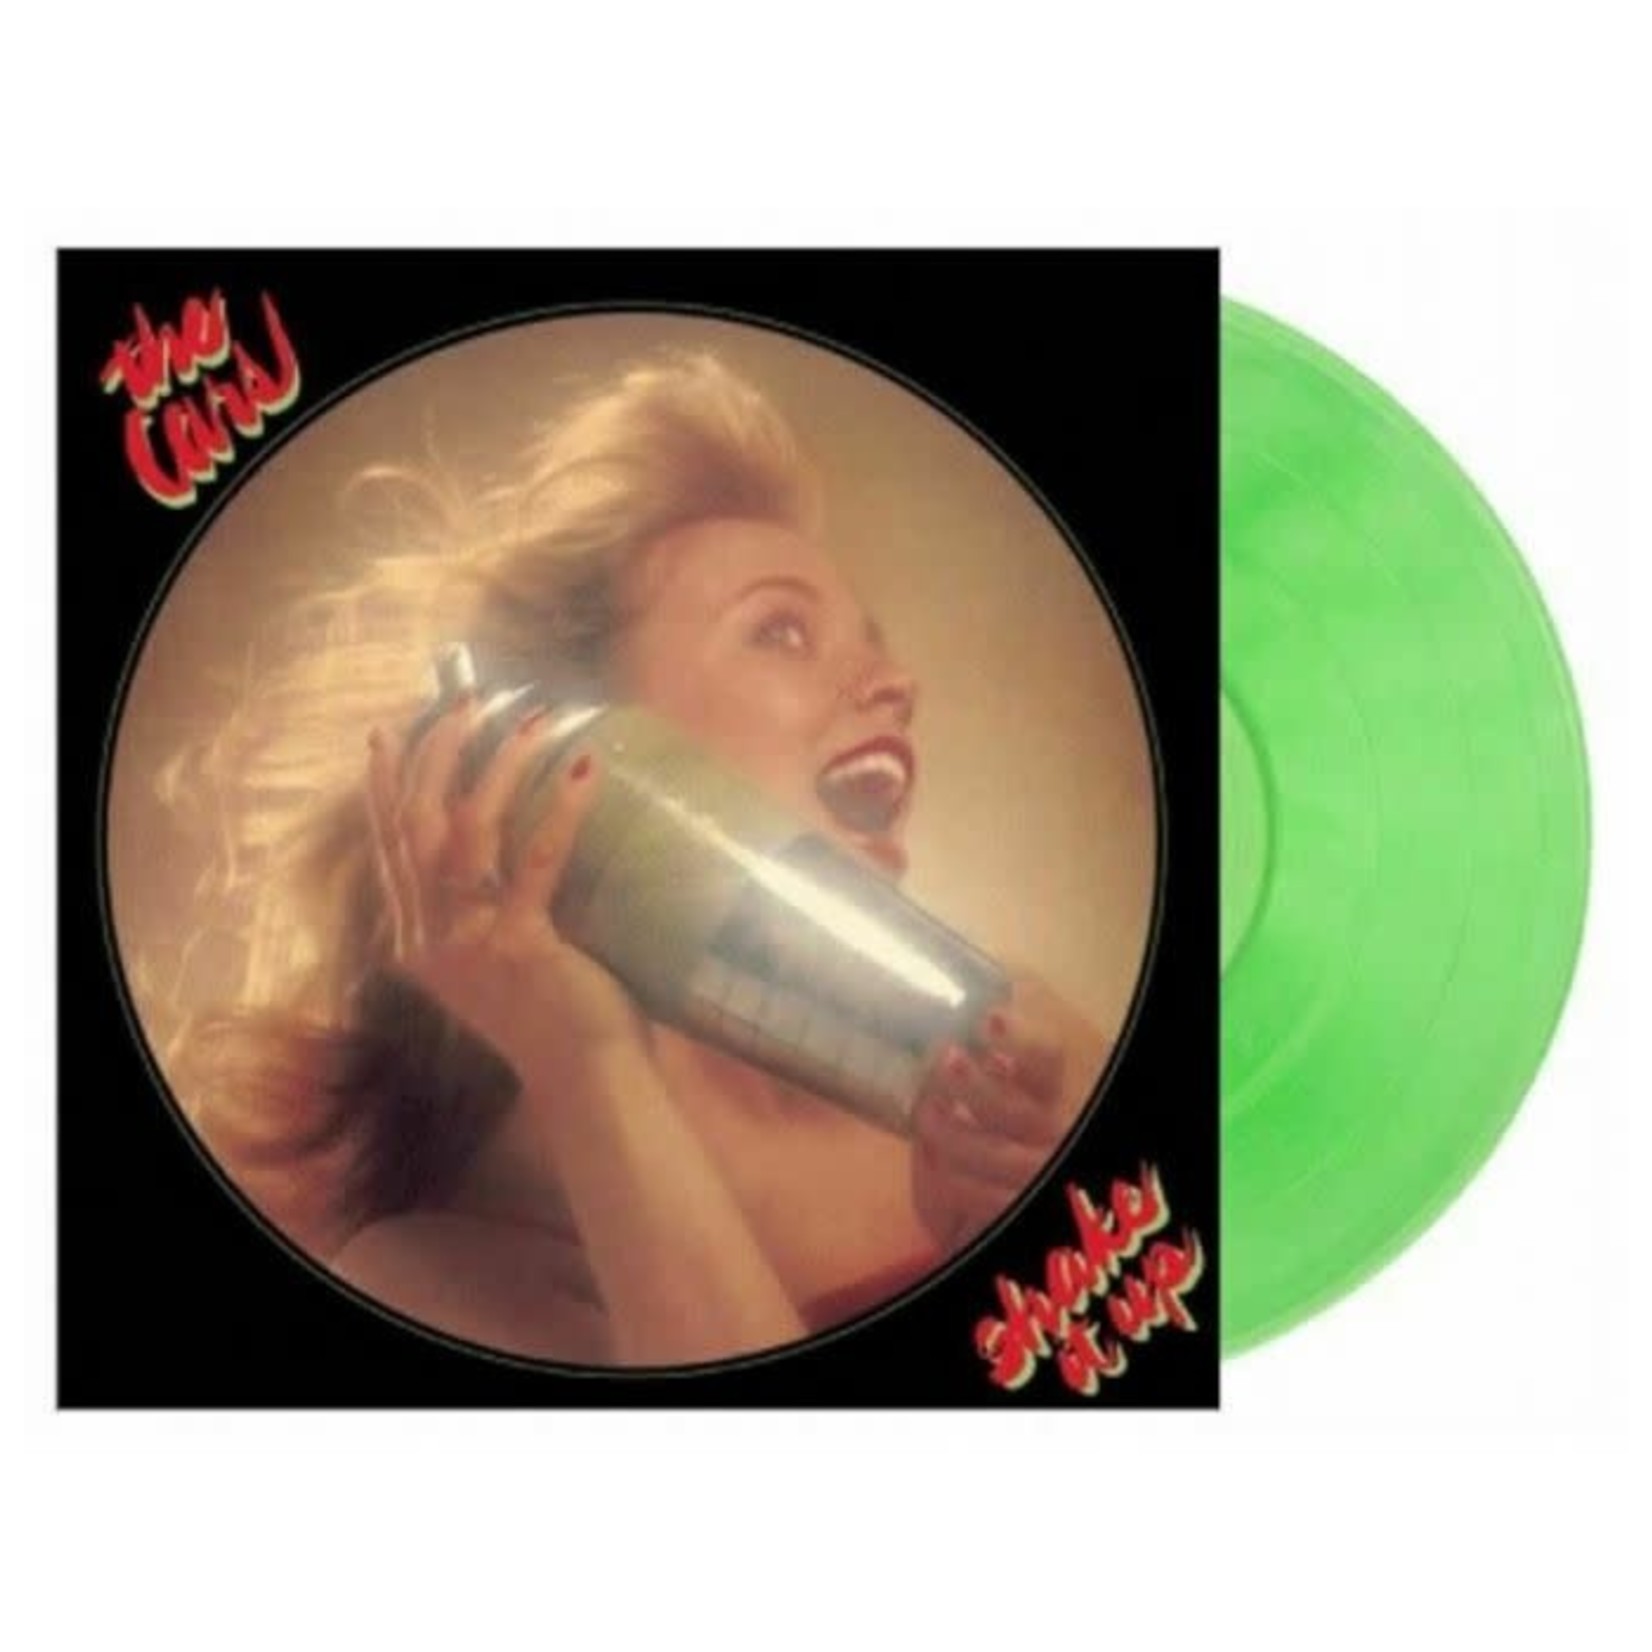 [New] The Cars - Shake It Up (green vinyl)